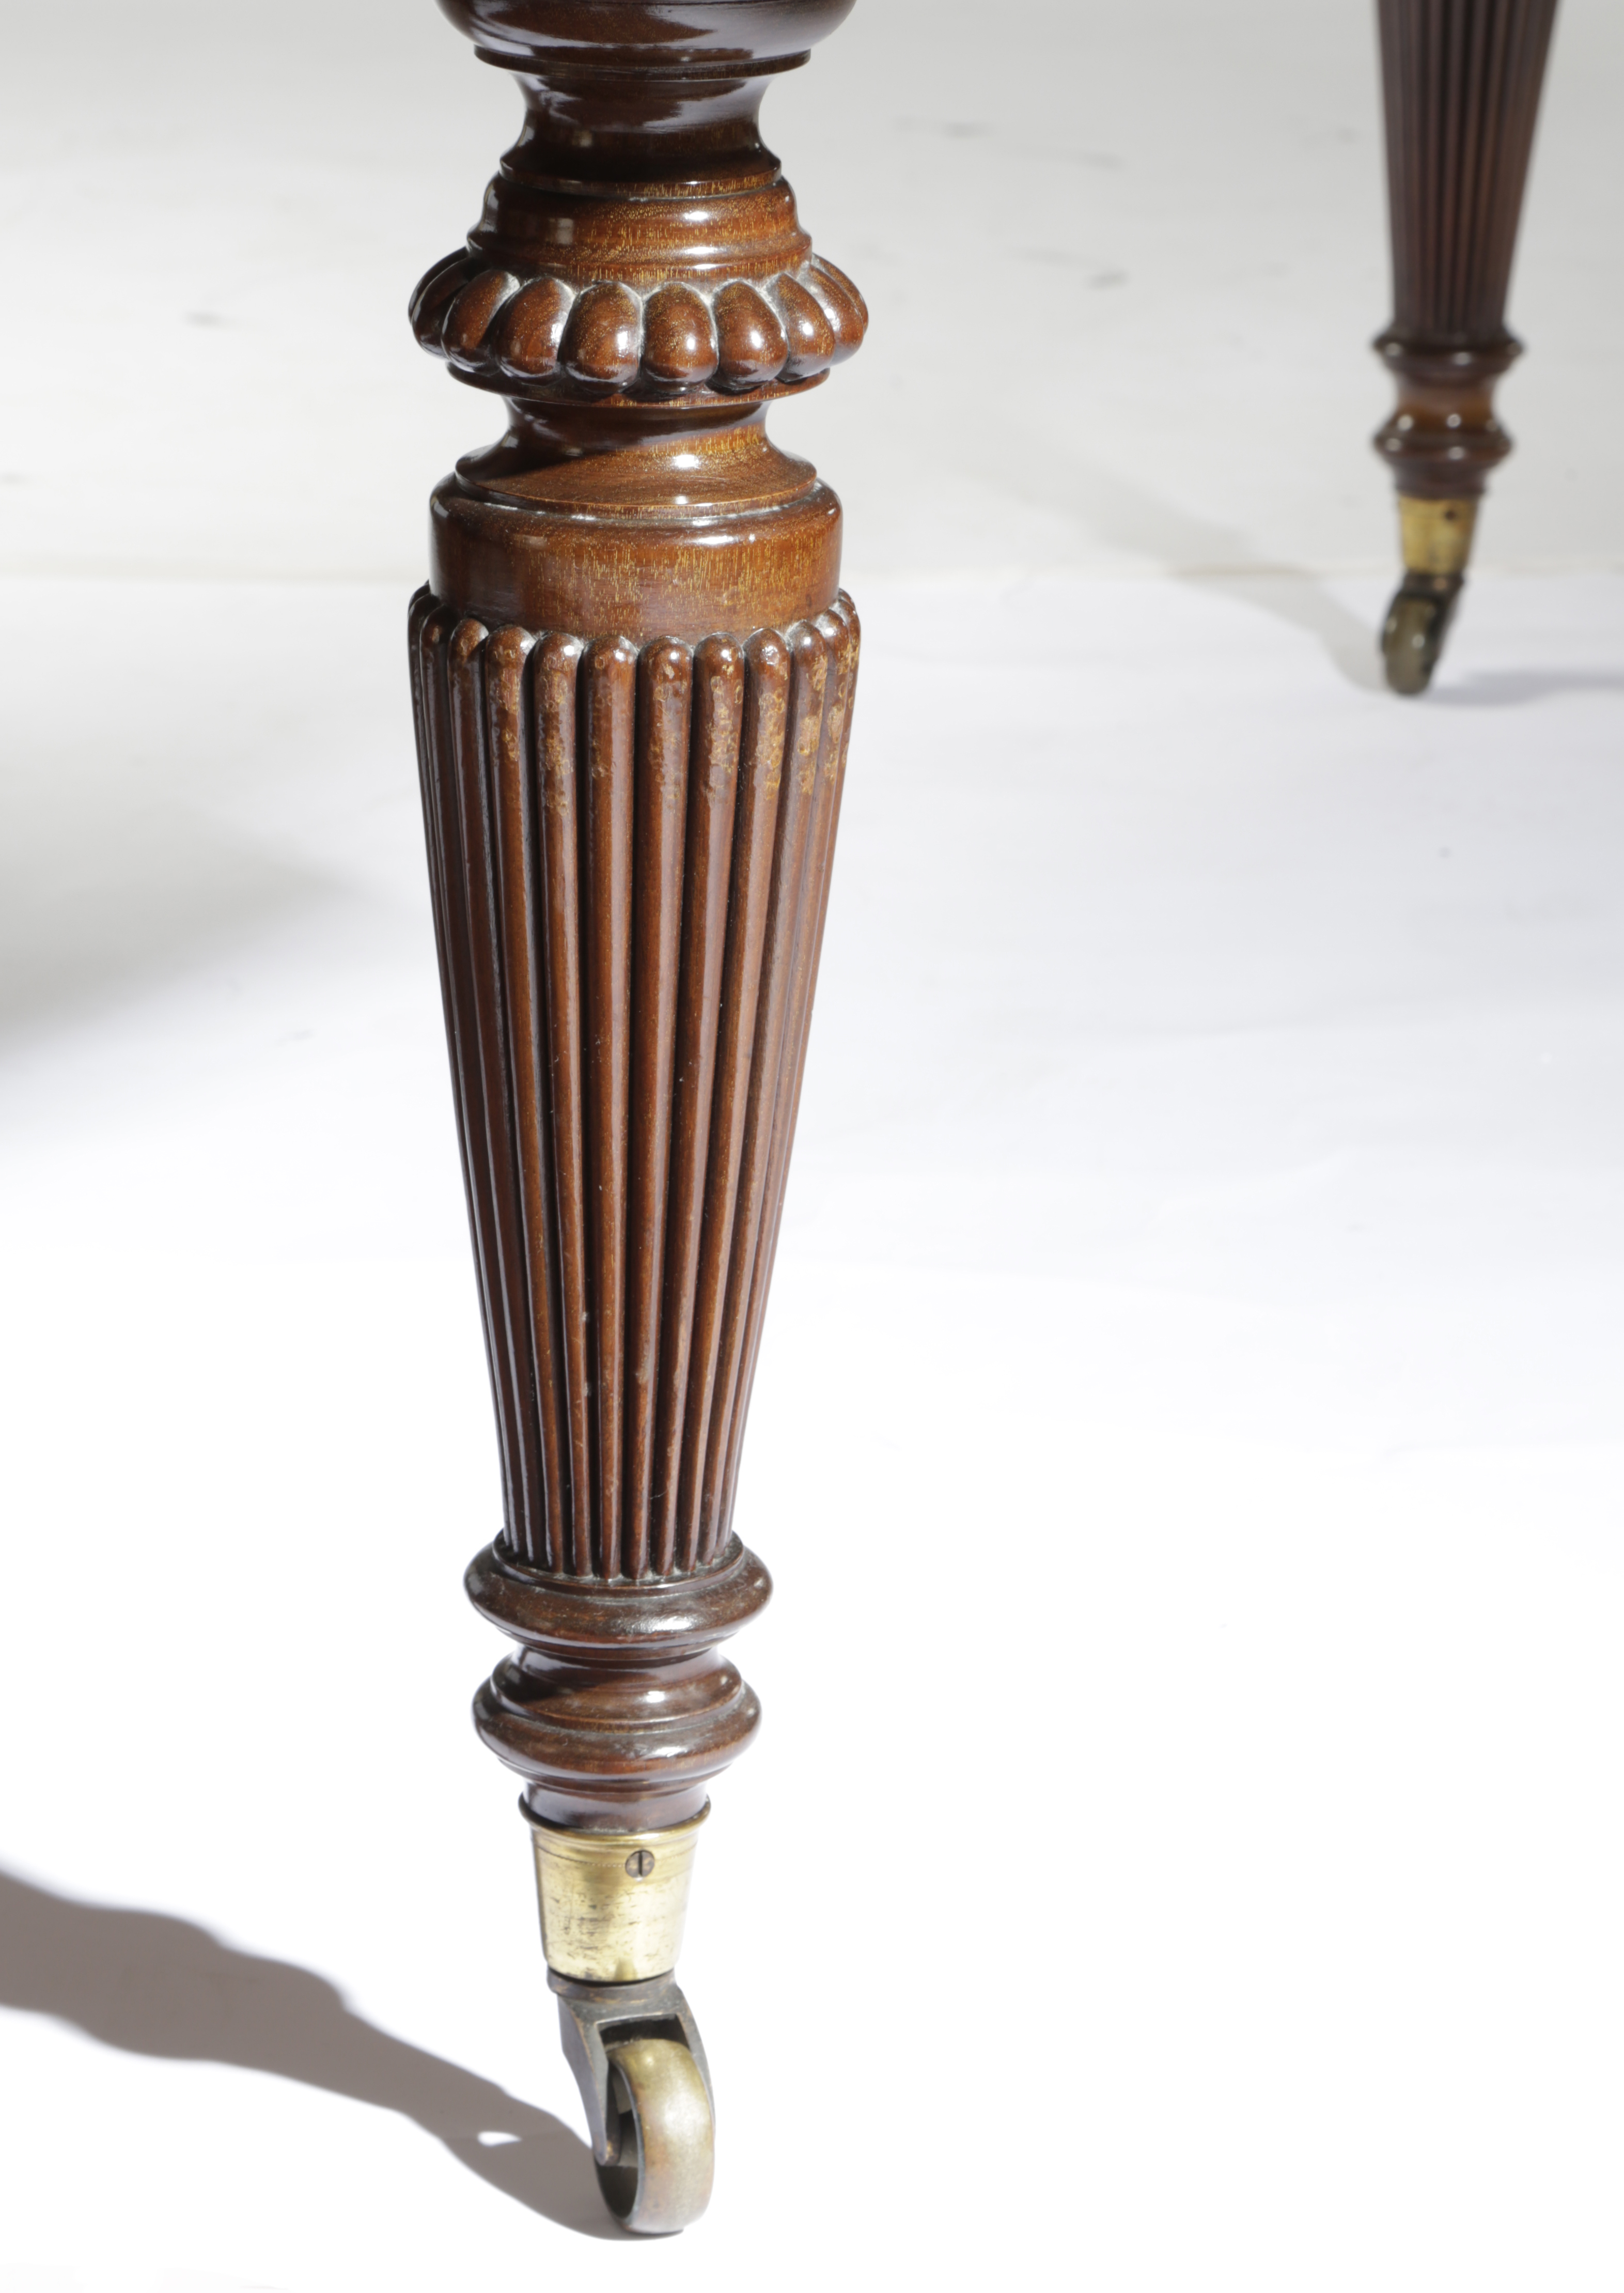 A VICTORIAN MAHOGANY DINING TABLE C.1870-80 the top with a reeded edge with rounded ends extending - Image 3 of 3